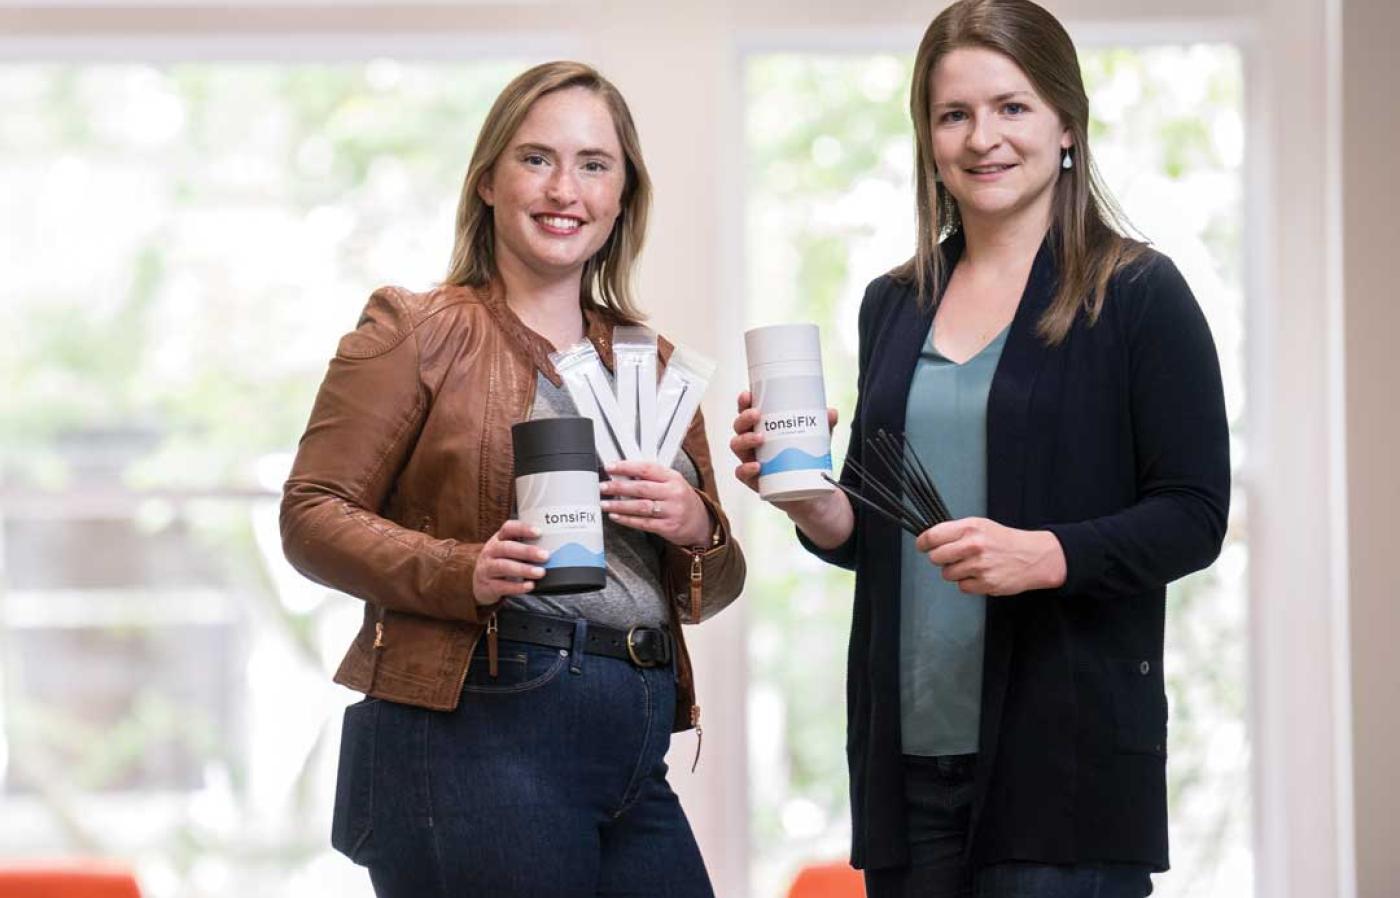 Two engineering members holding their business brand mugs.